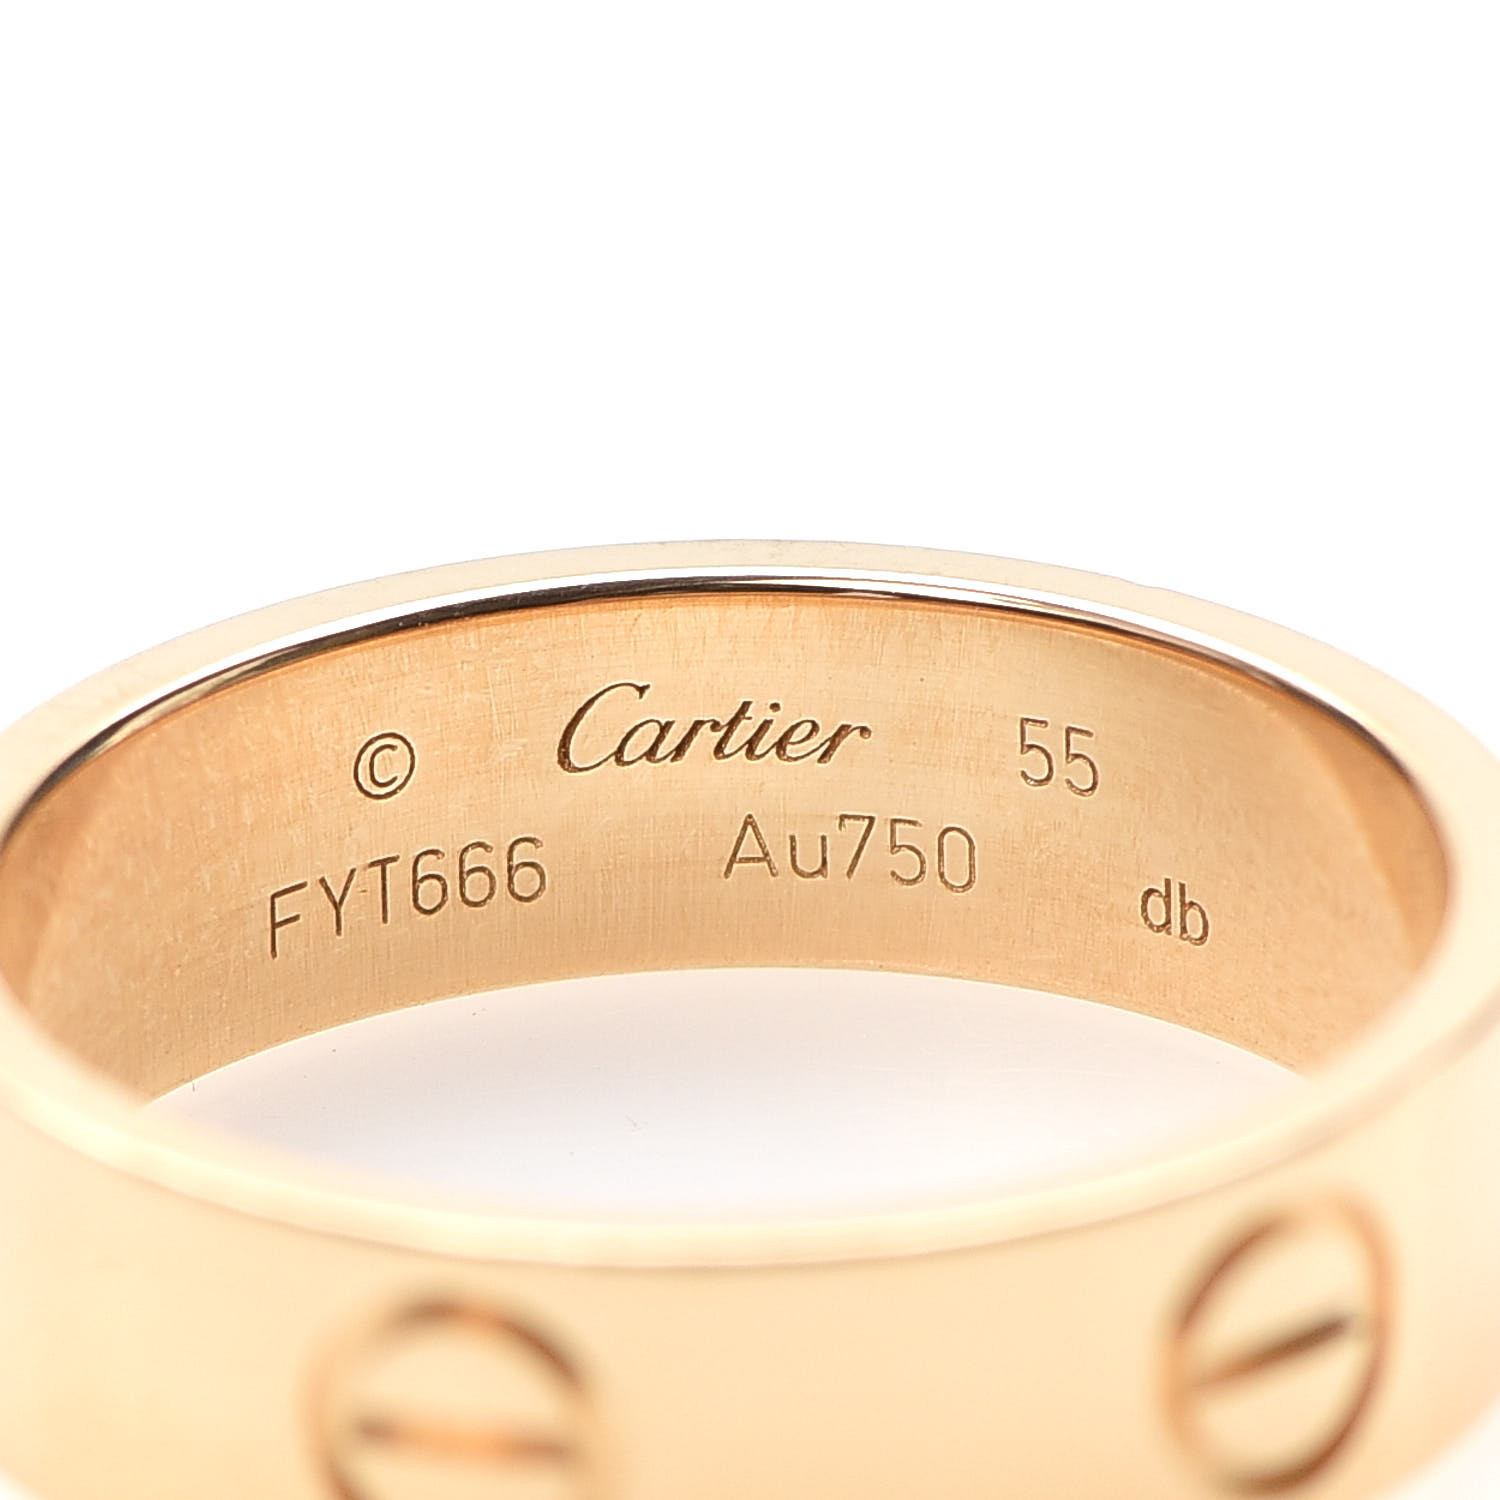 CARTIER 18K Yellow Gold 5.5mm LOVE Ring 55 7.25 680291 FASHIONPHILE